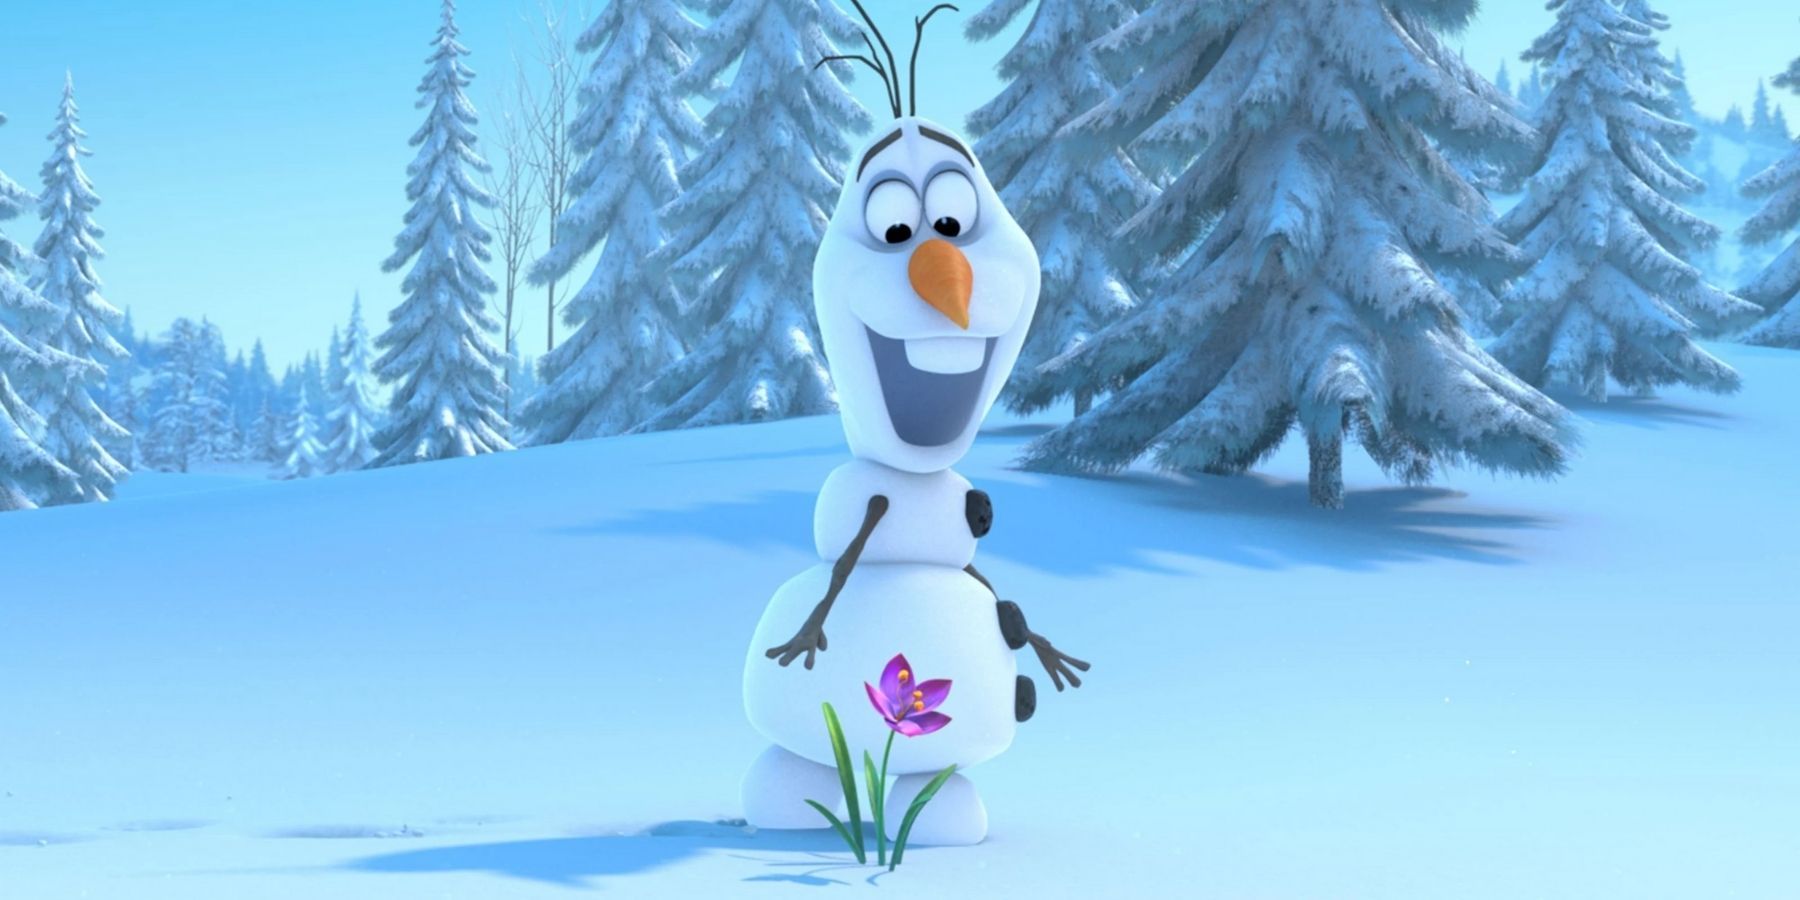 Olaf the snowman smiling in Frozen